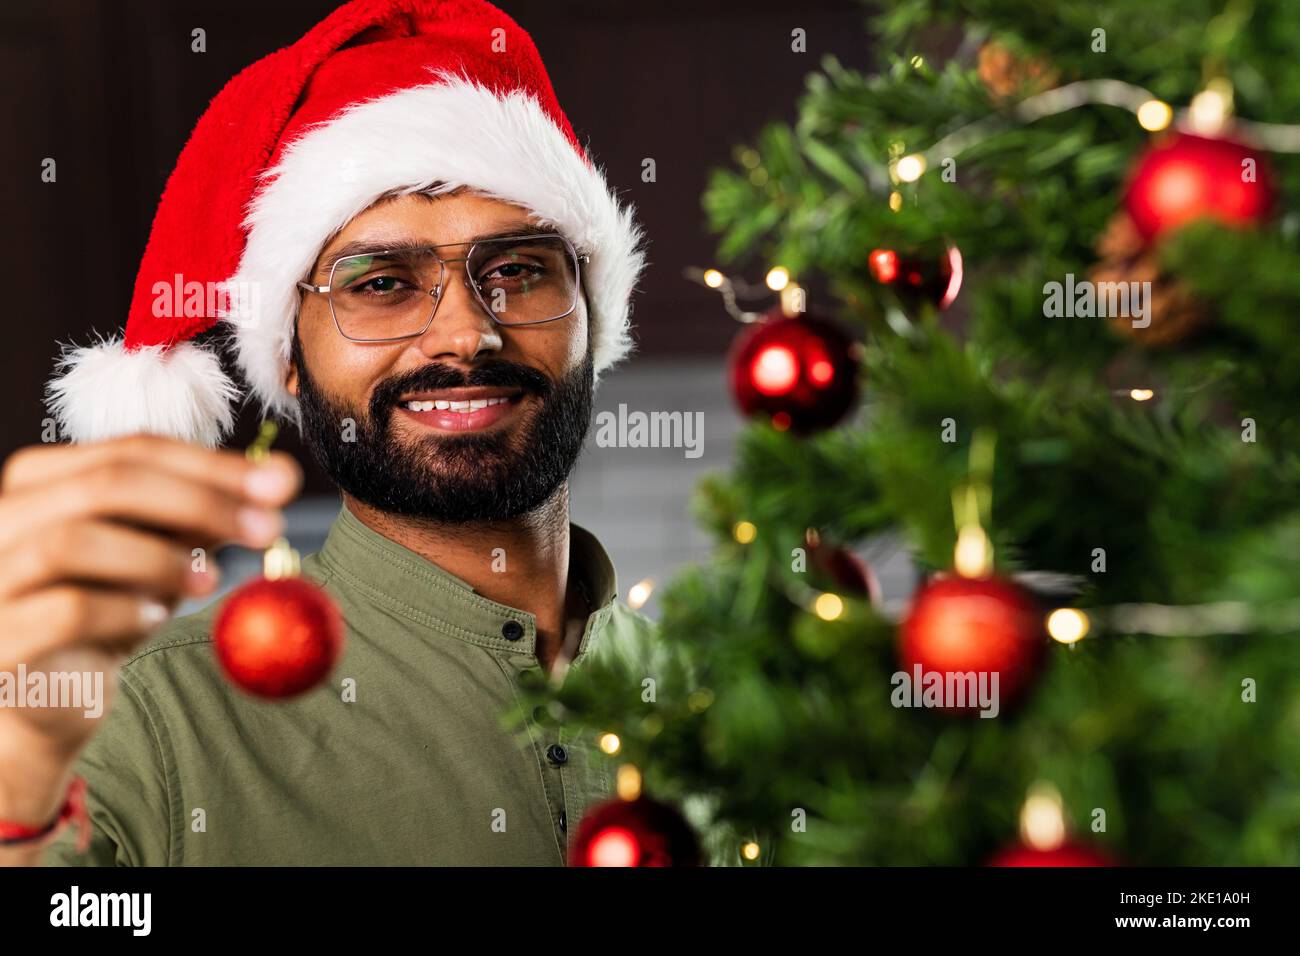 indian man in santa hat decorating Christmas tree with baubles Stock Photo